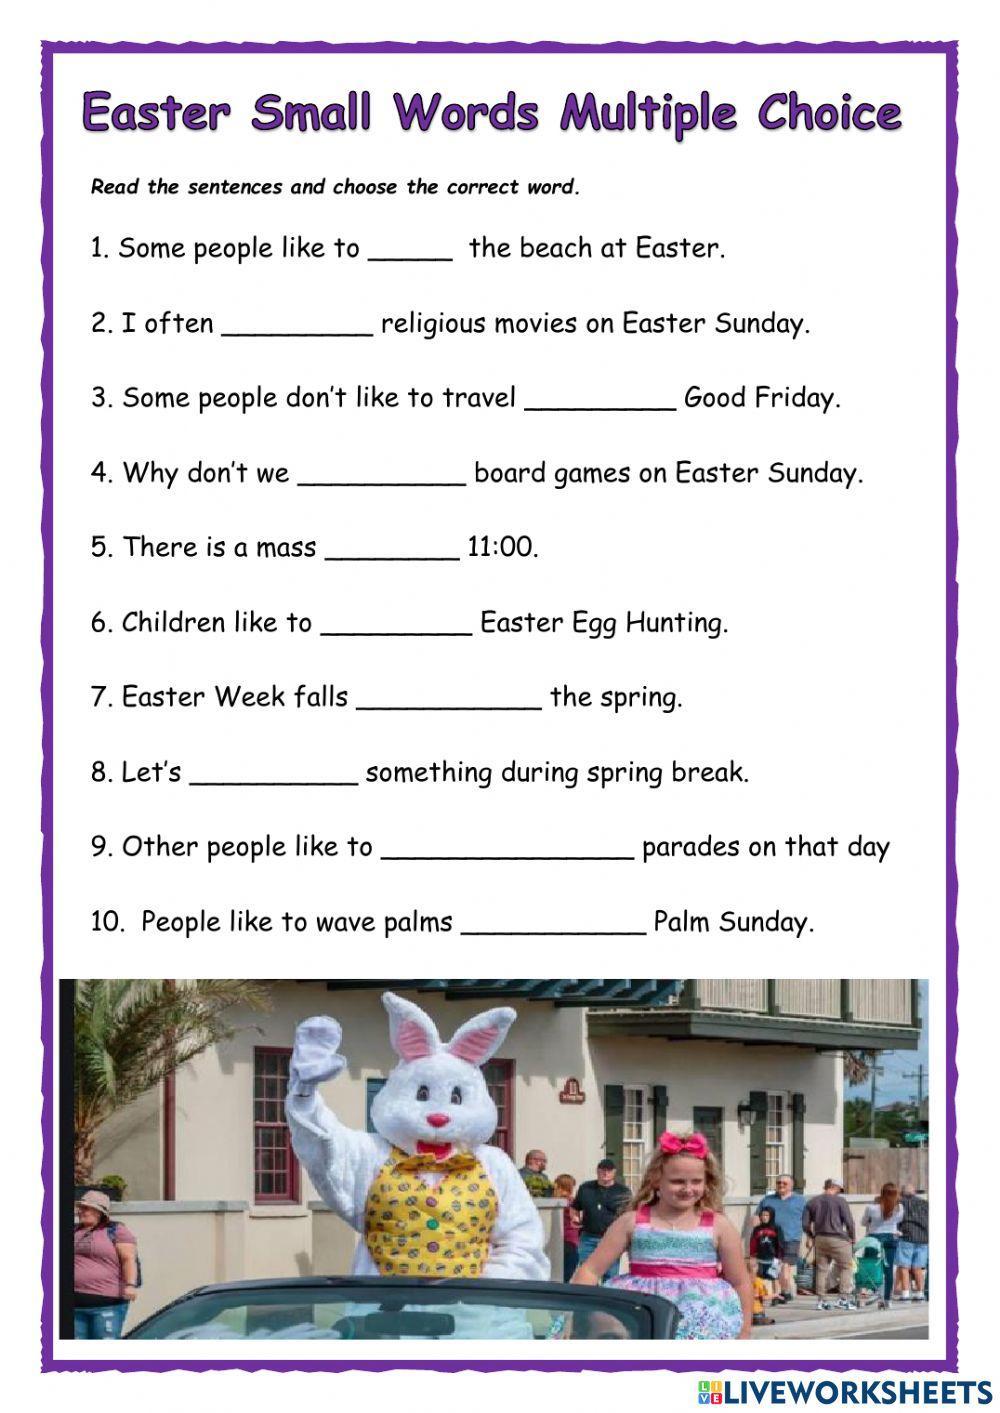 Easter Small Words Multiple Choice